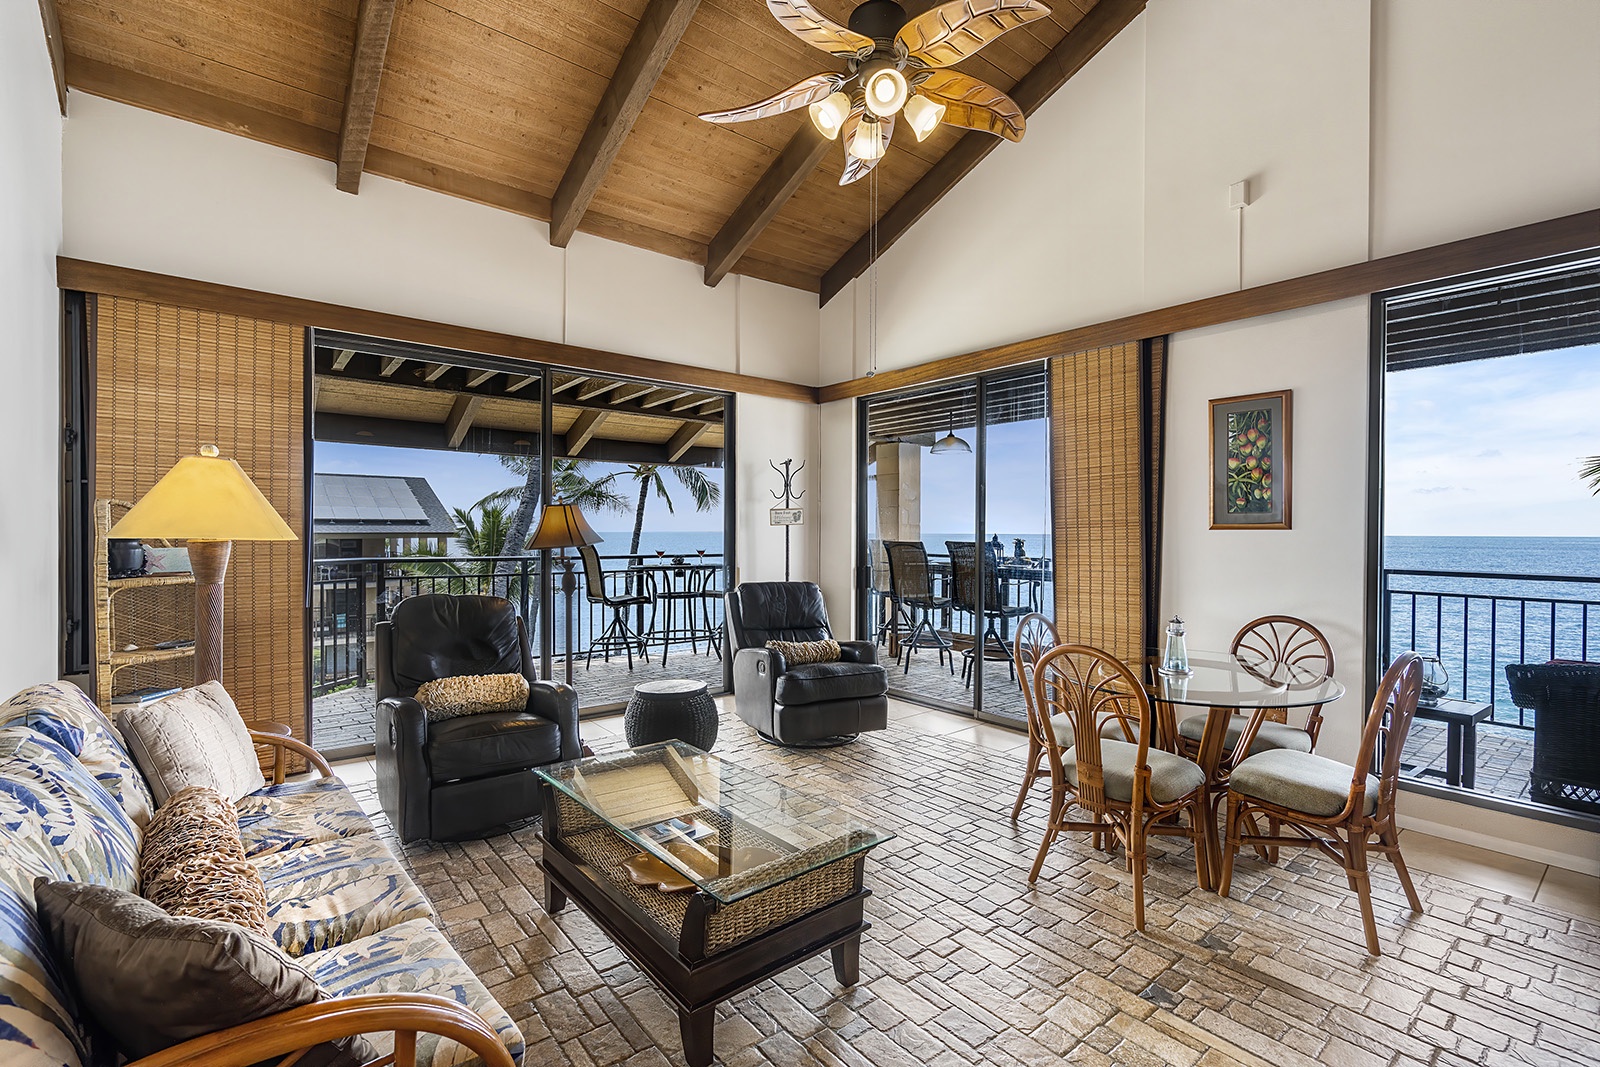 Kailua Kona Vacation Rentals, Kona Makai 6301 - Relax and watch your favorite TV show or just sit and admire the ocean views!